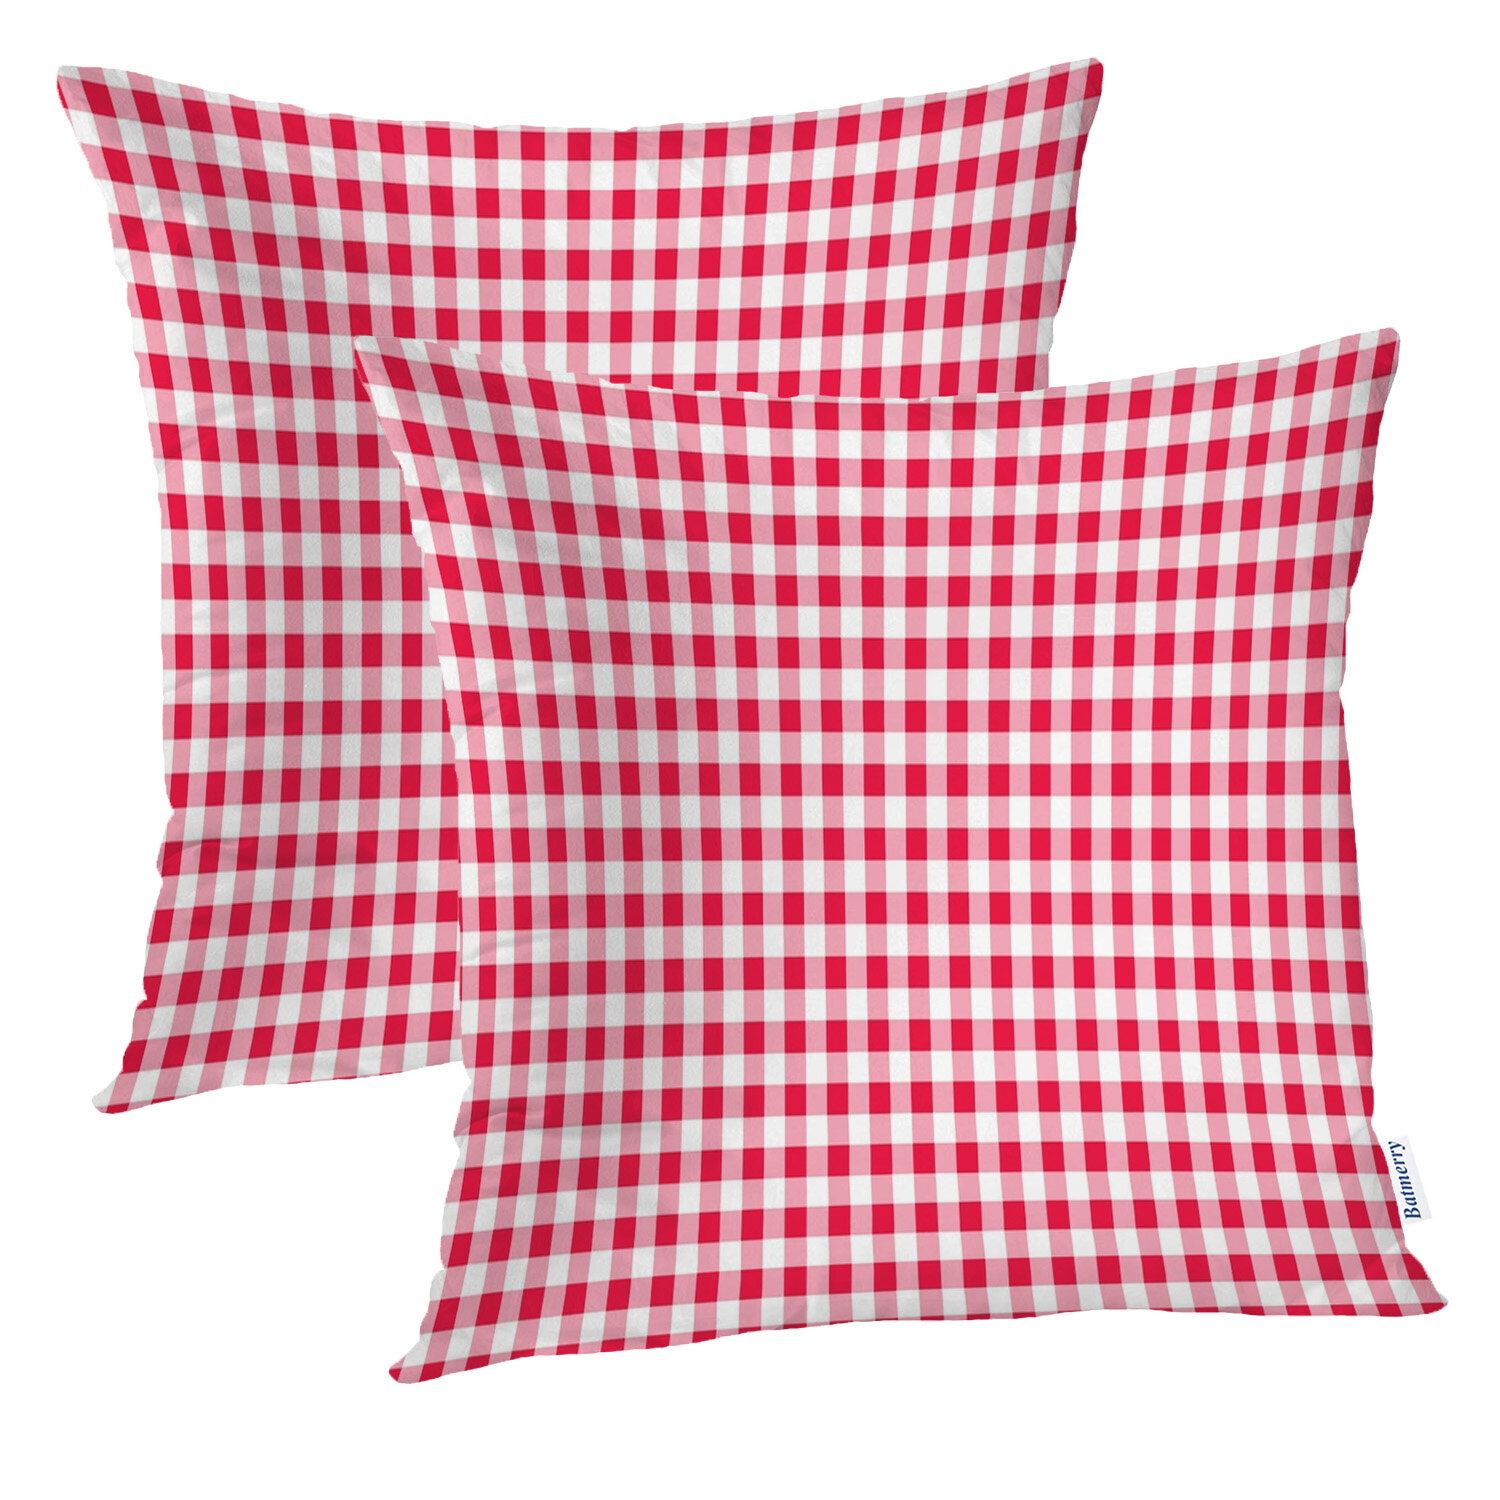 Gingham Red and White Checked with Table Check Decorative Pillow Case Home Decor Square 18x18 Inches Pillowcase